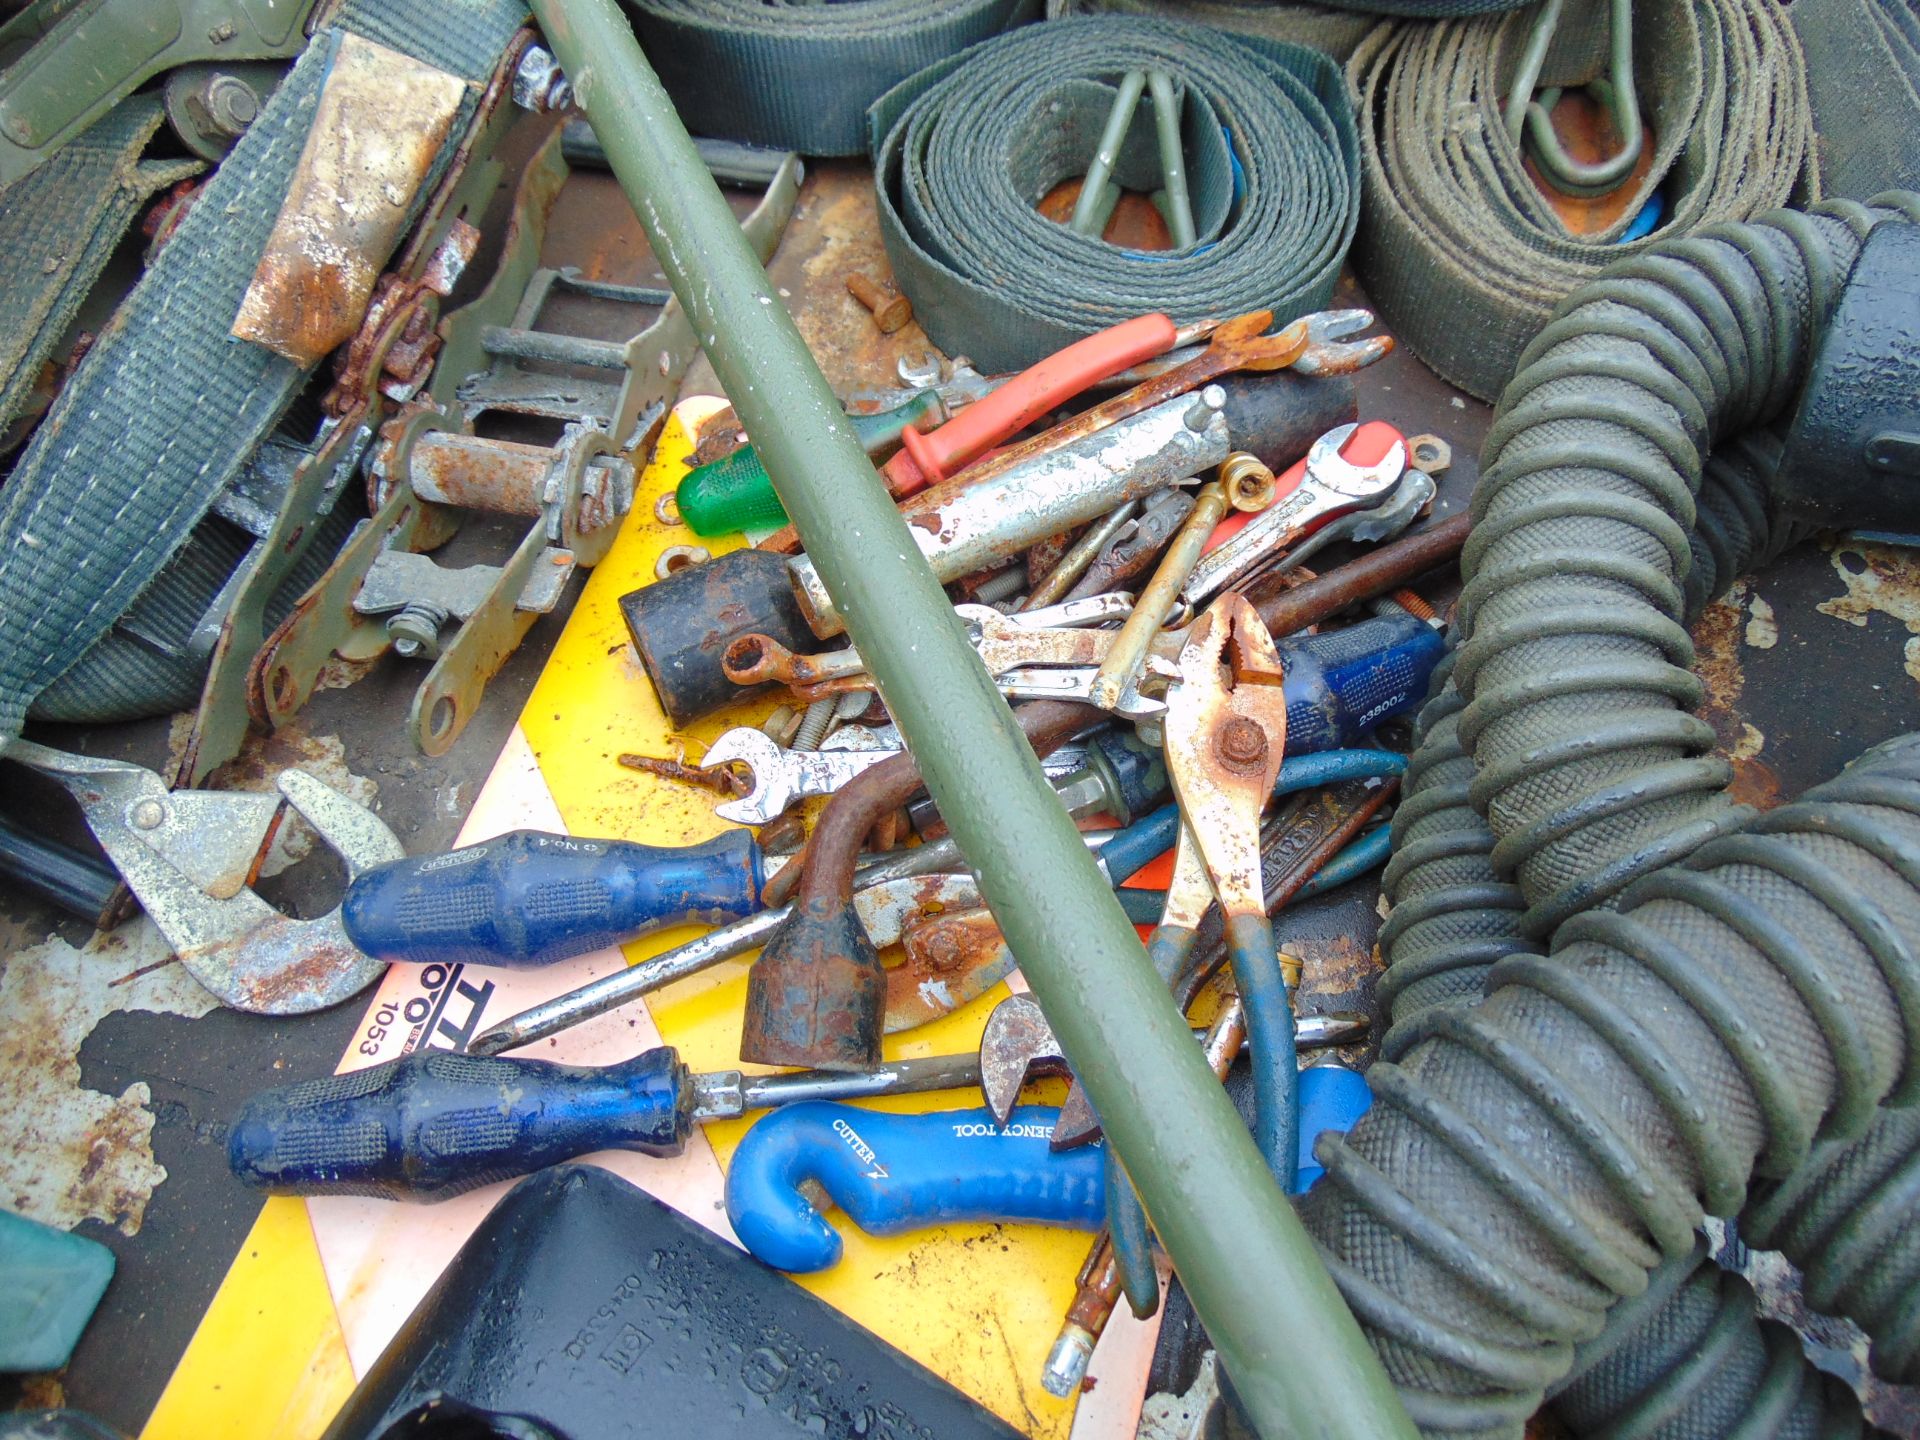 Tools, Camo Net Poles, Ratchets & Straps, First Aid Kits, Exhaust Disposal Hose etc - Image 7 of 9